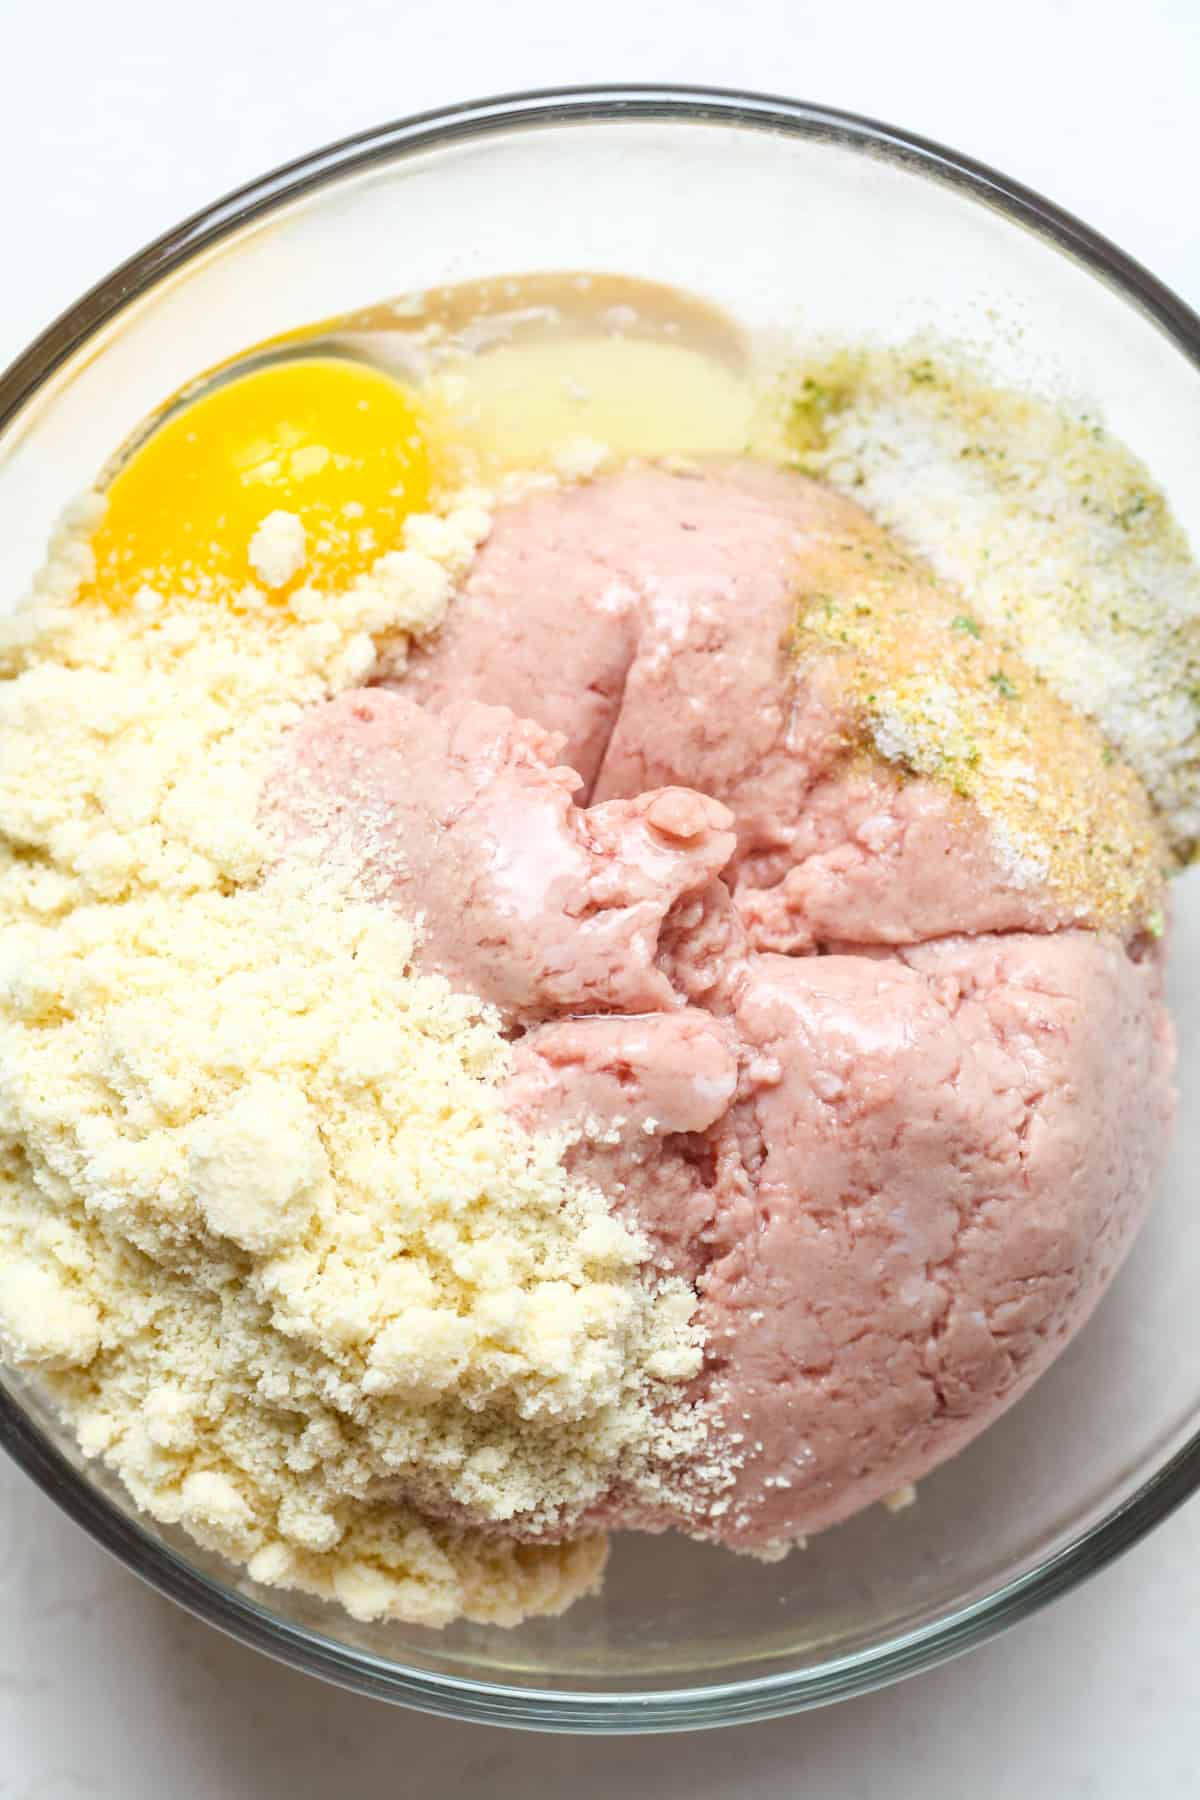 Turkey, egg and flour in bowl.